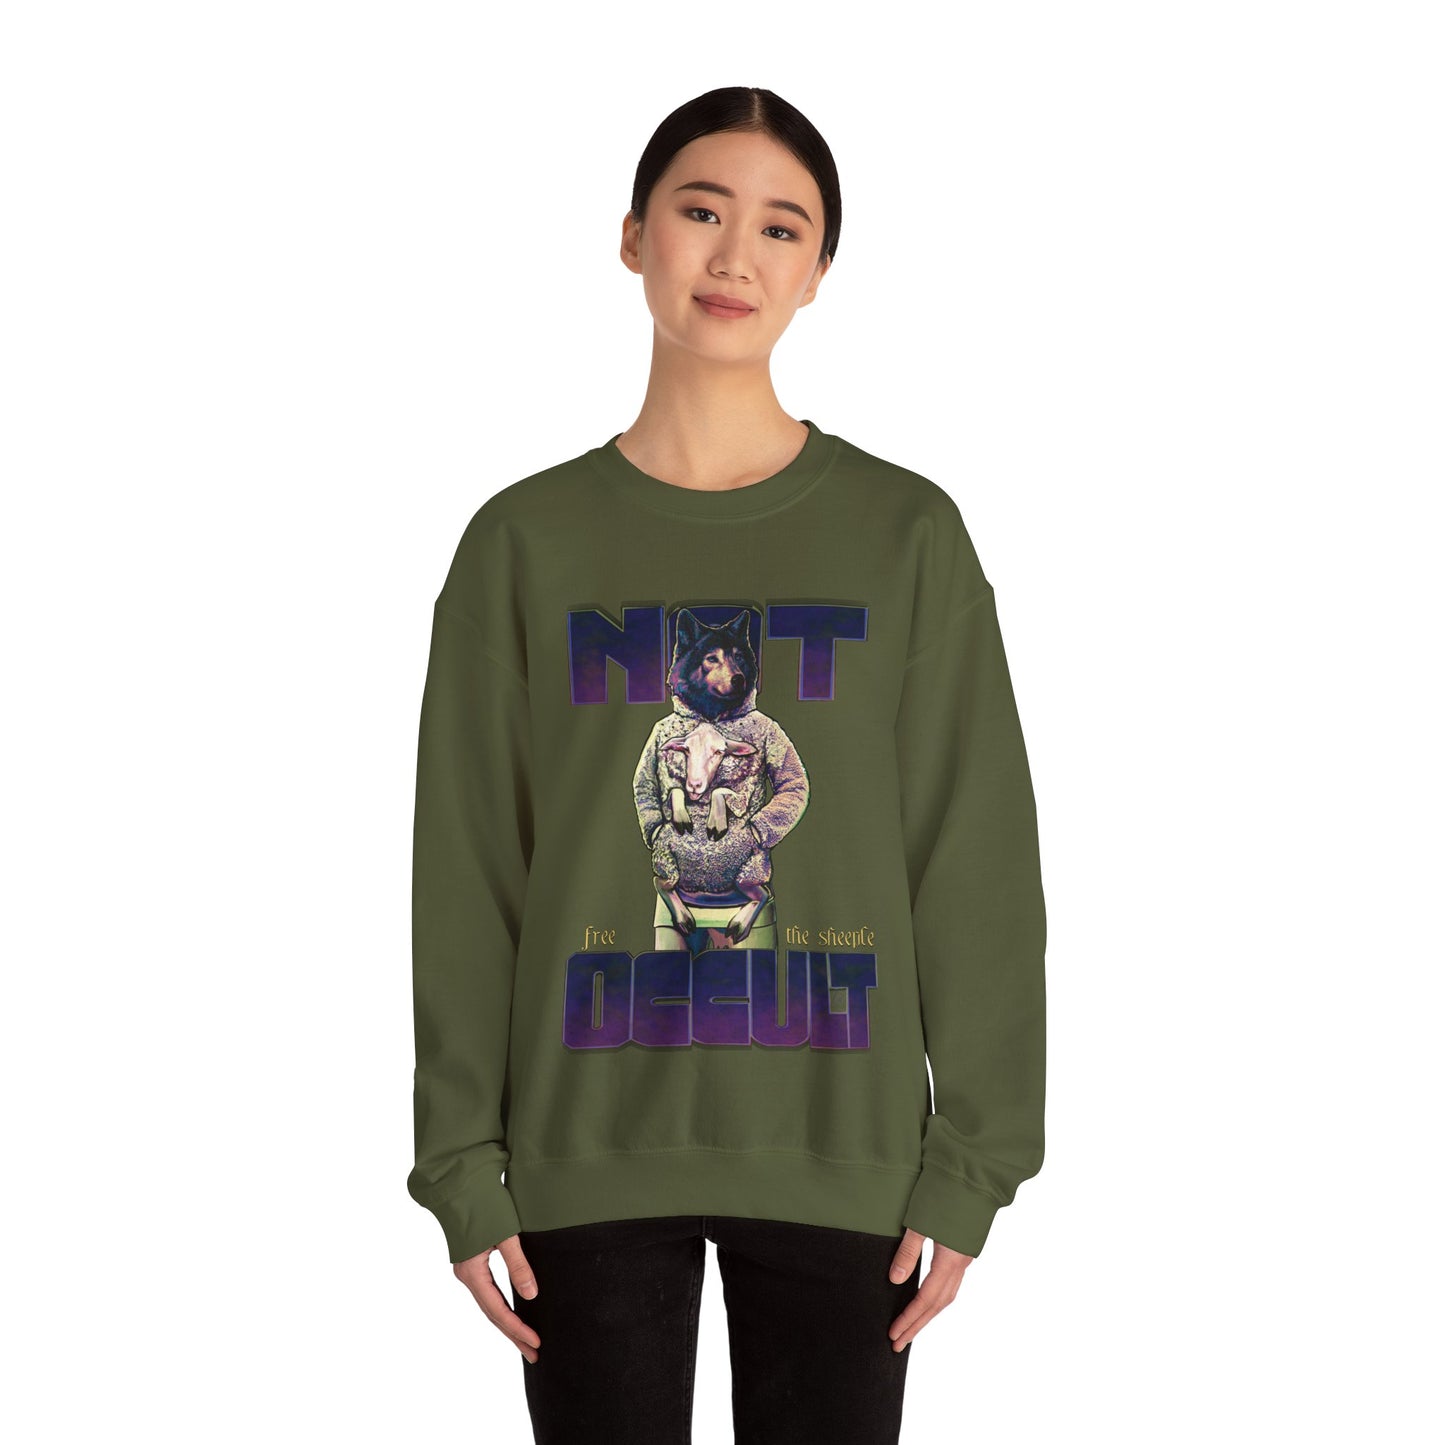 Wolf In Wool | Not Occult | Graphic Sweatshirt